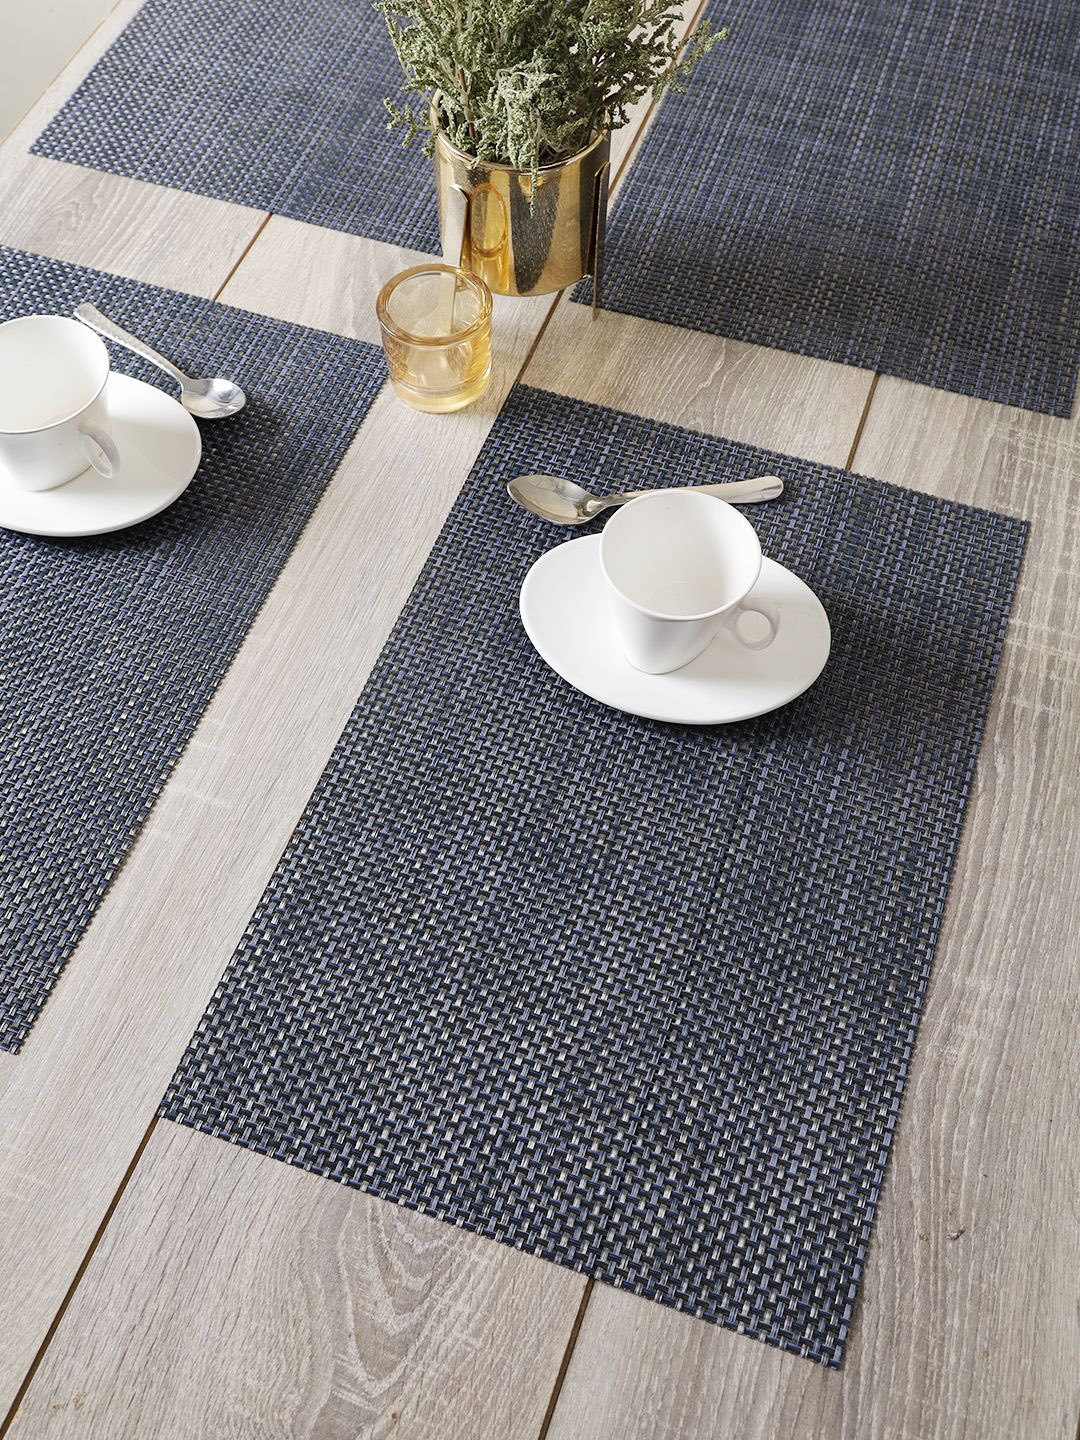 BIANCA  Set of 6 Blue & Black Rectangle Table Placemats